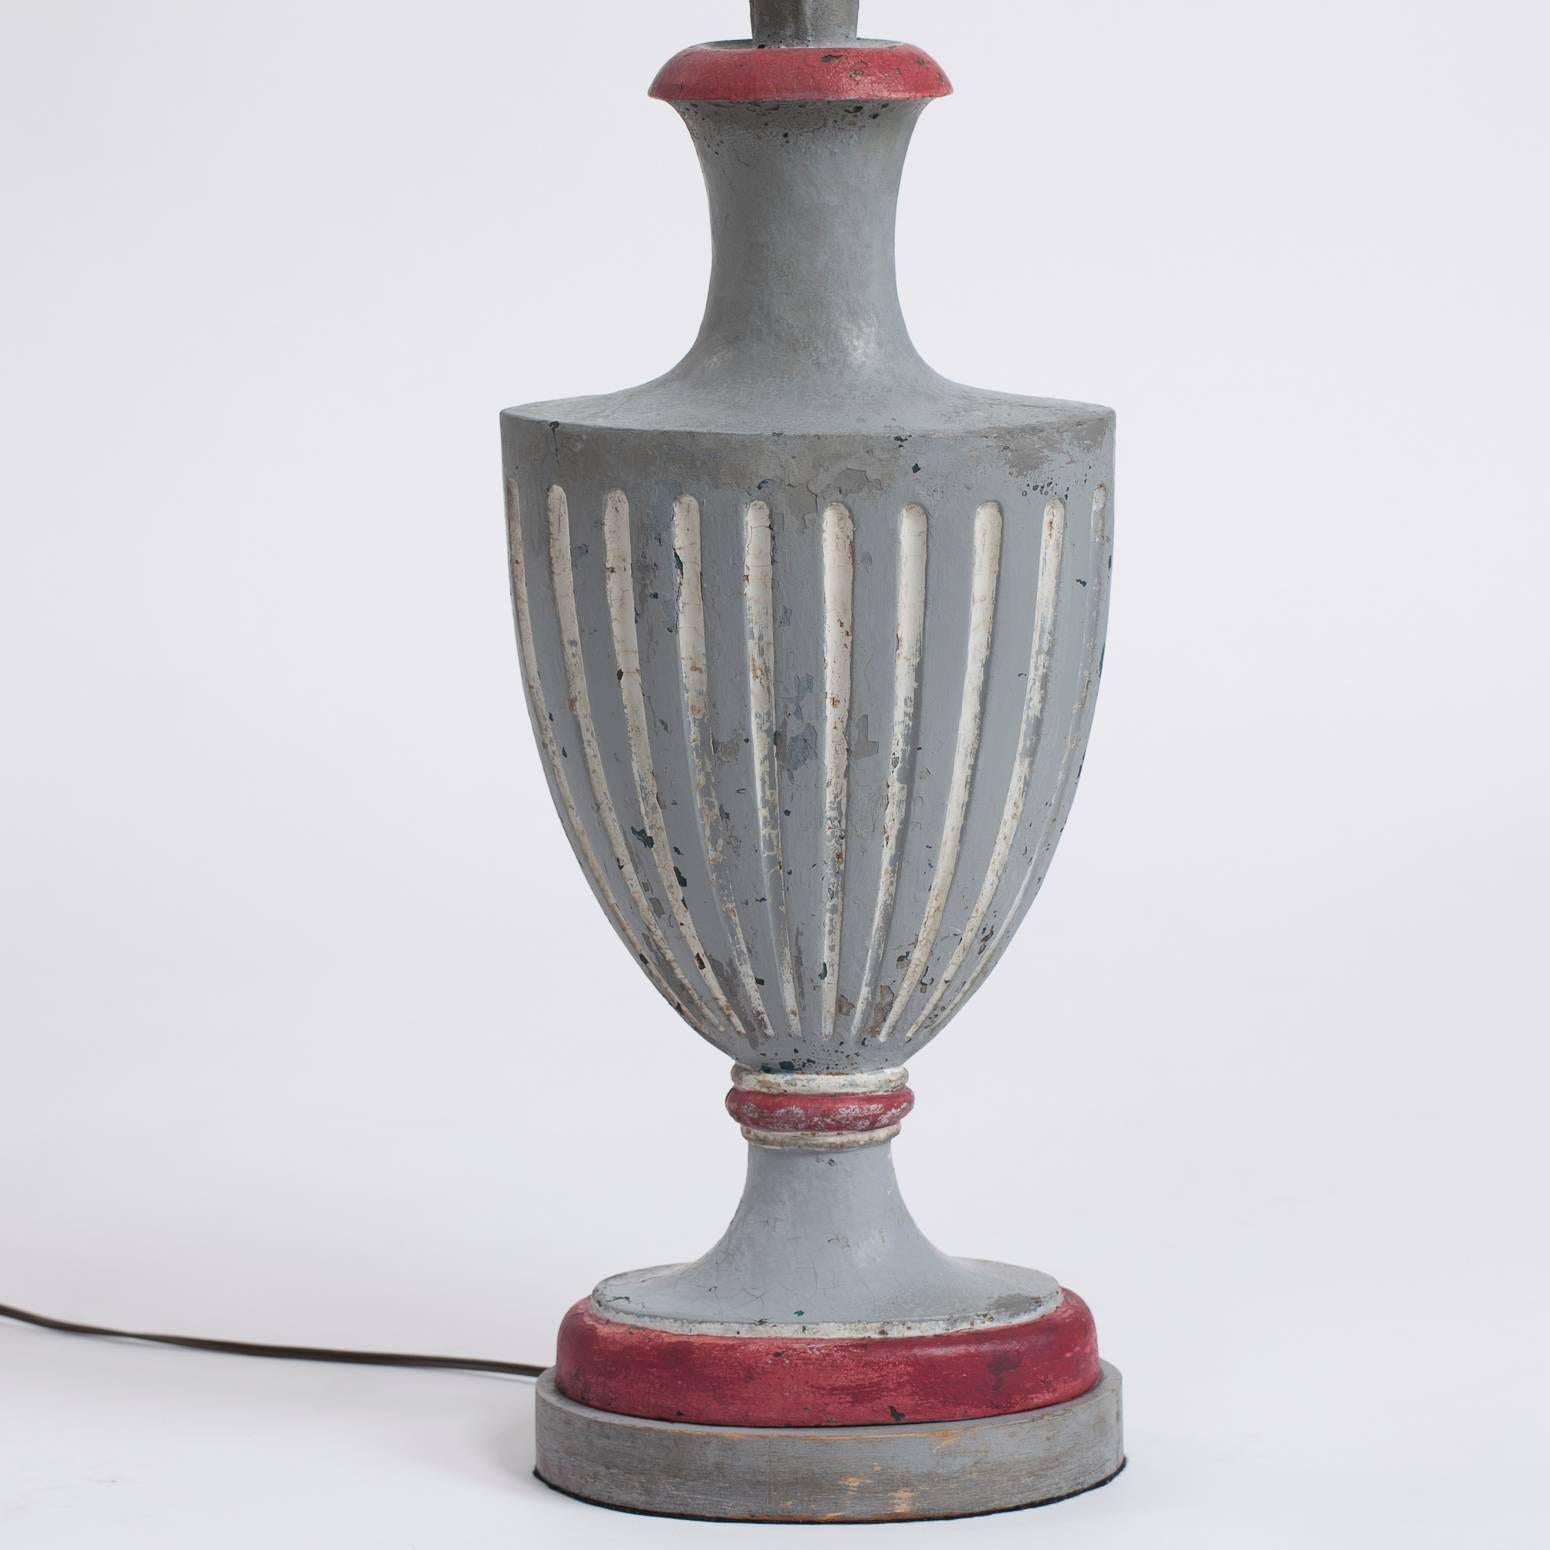 This unusual pair of floor lamps in a fanciful leaf and lily design with grey painted leaves and red berries date from circa 1900. The bases in the form of classical urns echo the red and grey of the flowers and the matching finials. The custom oval